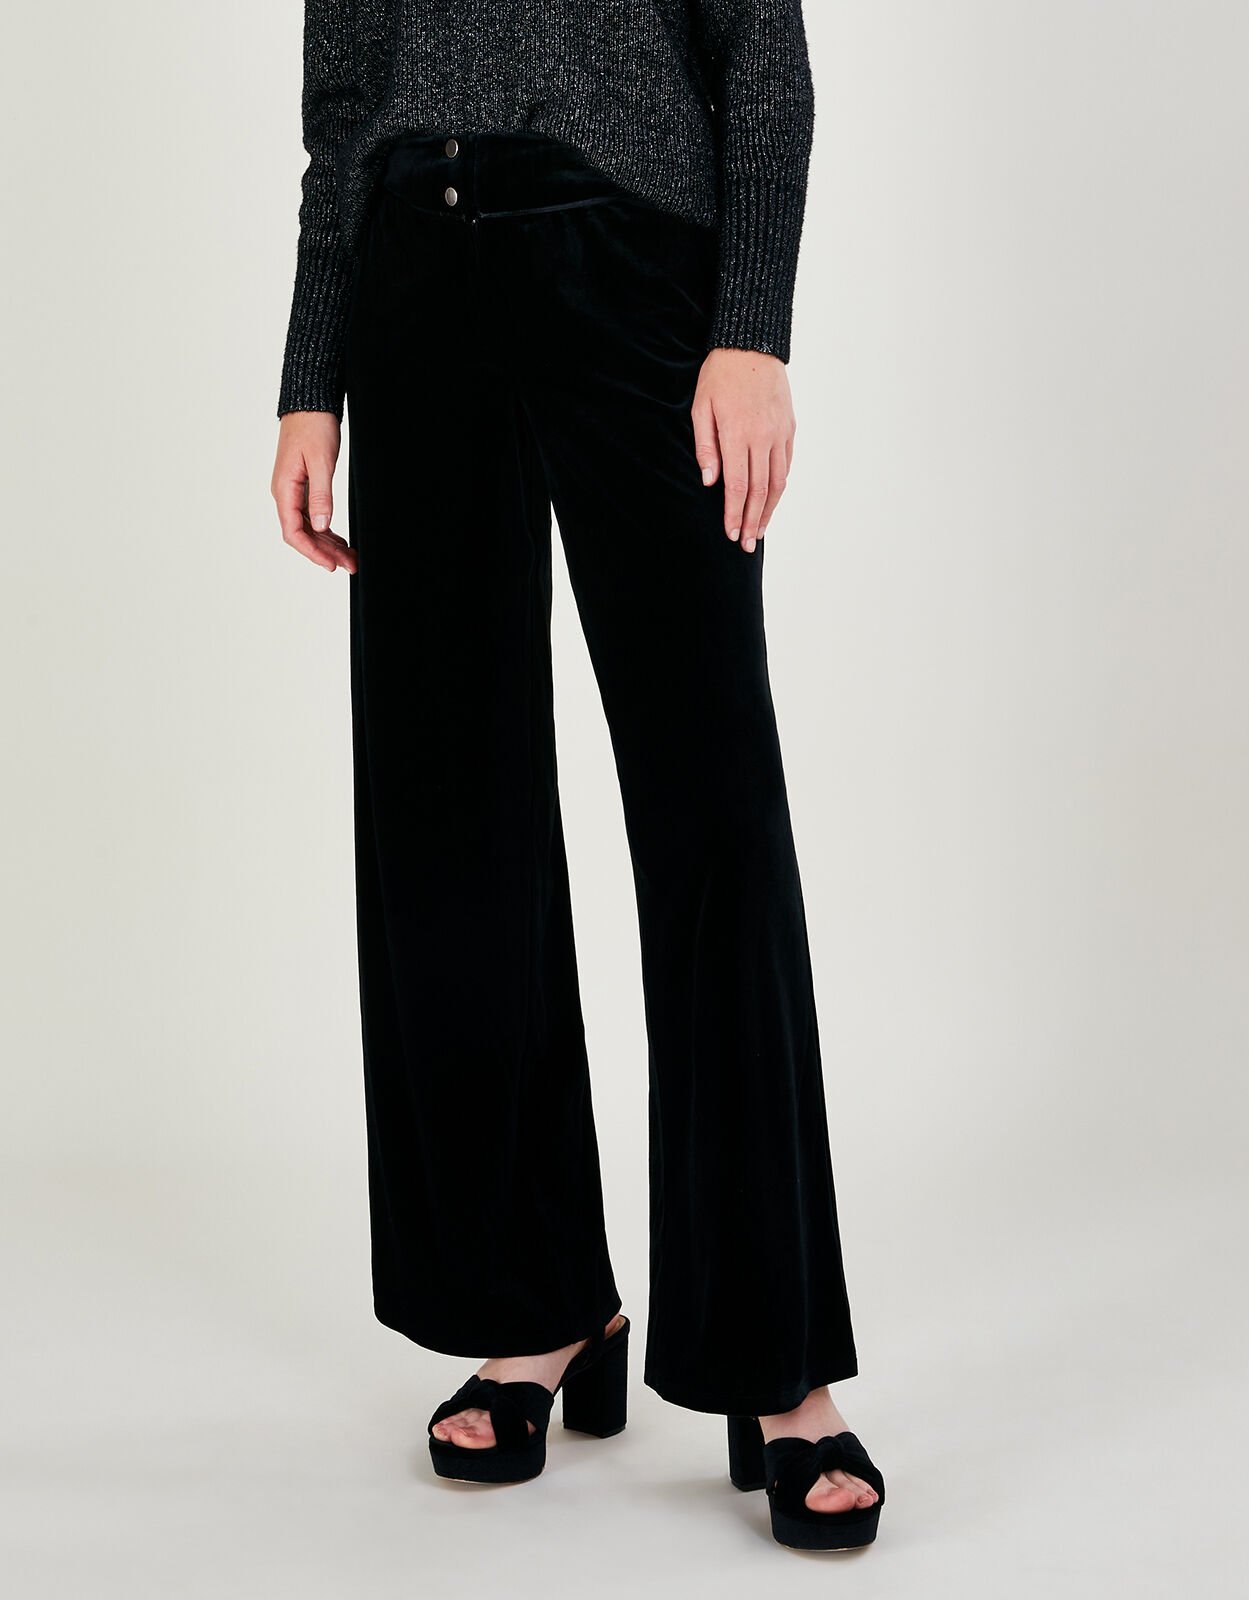 Buy Lipsy Black Velvet High Waisted Tailored Suit Trousers from Next India